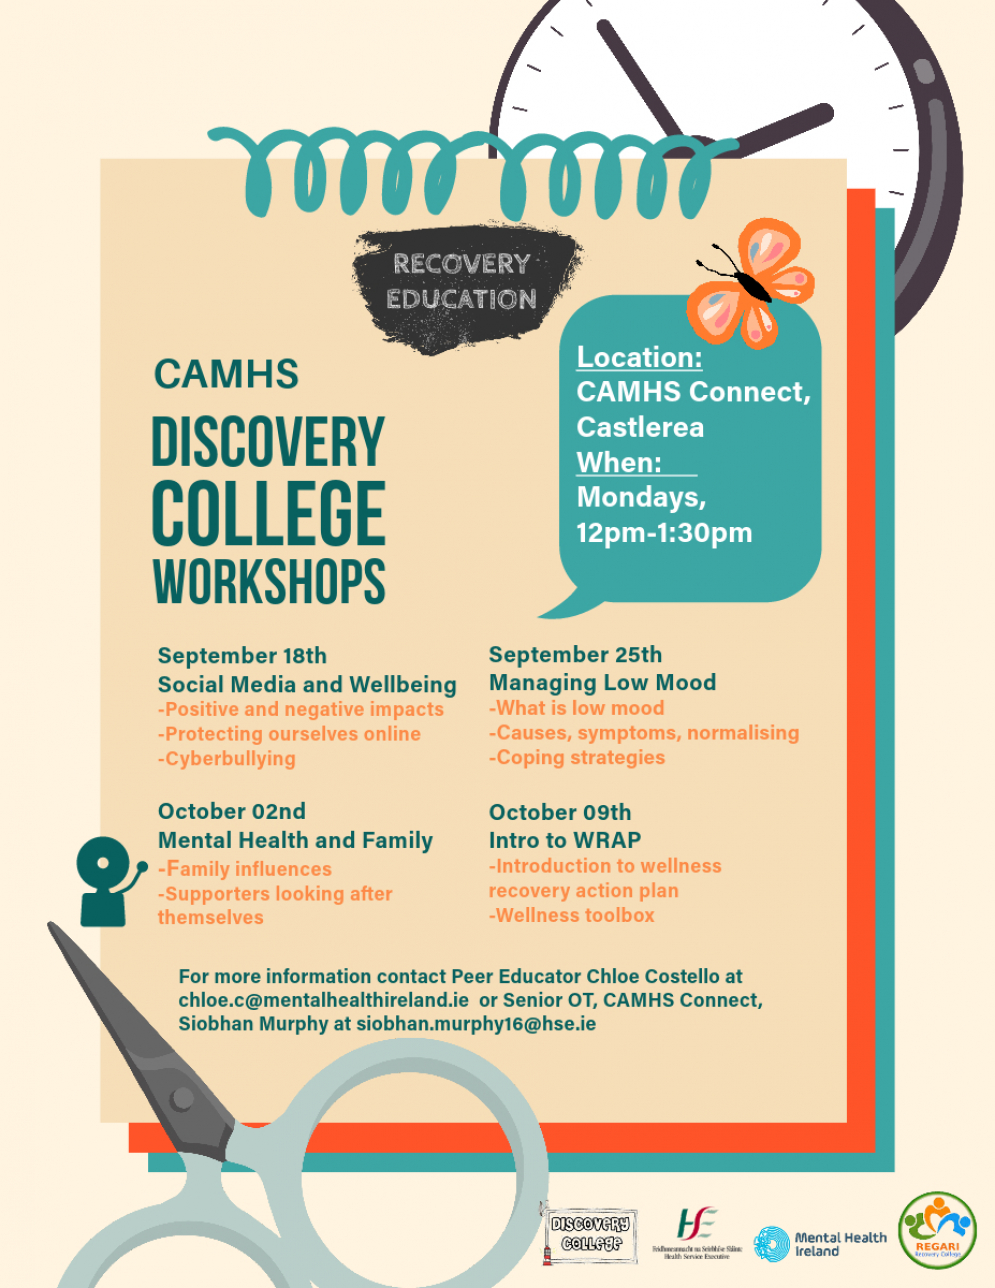 CAMHS Discovery College Workshops